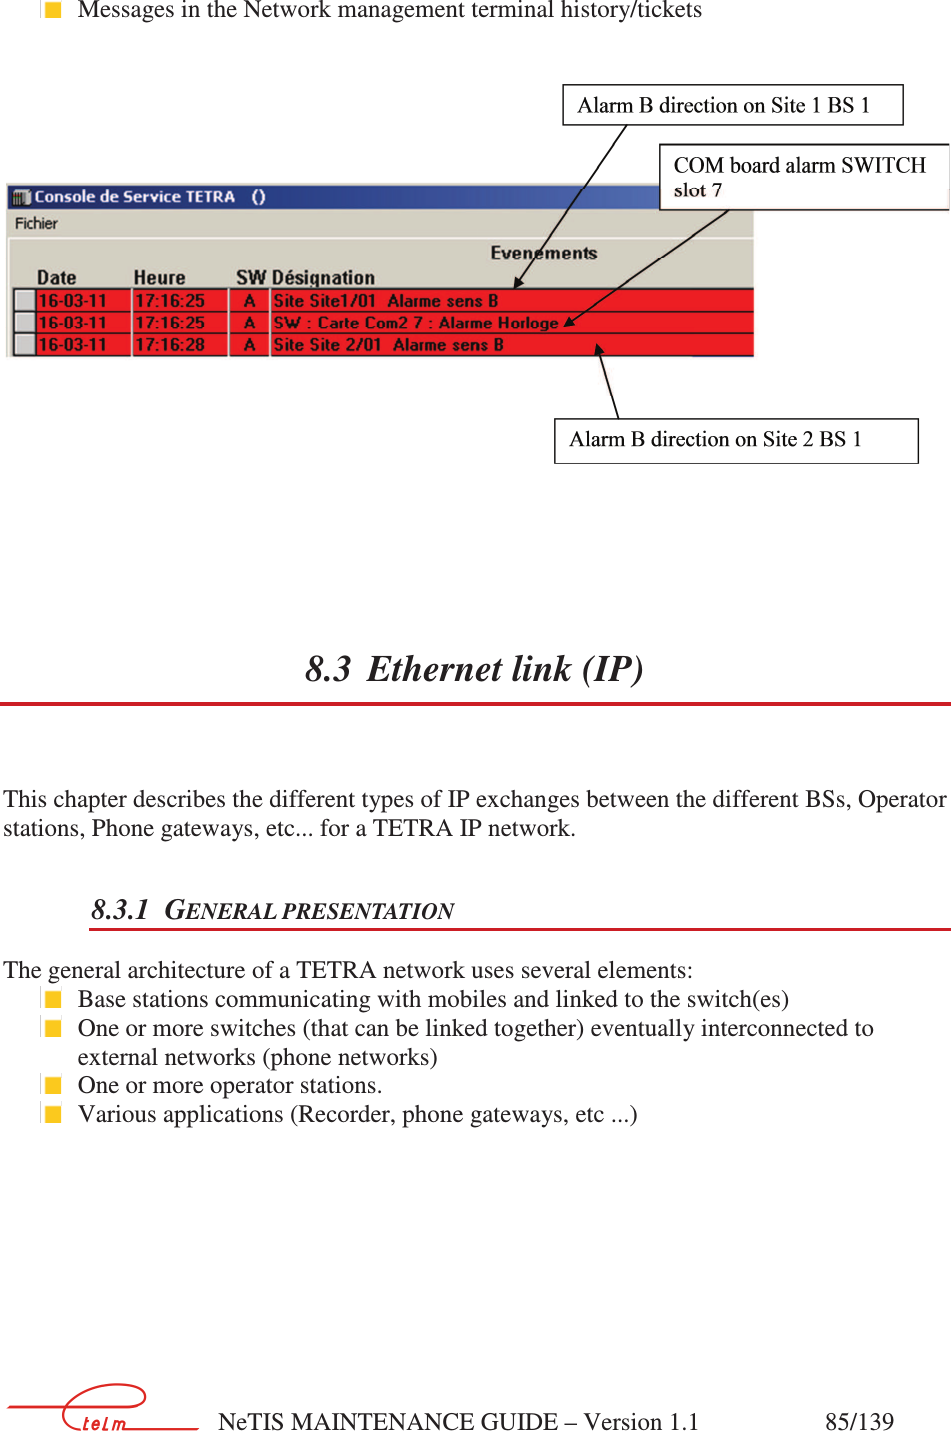        NeTIS MAINTENANCE GUIDE – Version 1.1                    85/139     Messages in the Network management terminal history/tickets      8.3 Ethernet link (IP)  This chapter describes the different types of IP exchanges between the different BSs, Operator stations, Phone gateways, etc... for a TETRA IP network. 8.3.1 GENERAL PRESENTATION The general architecture of a TETRA network uses several elements:  Base stations communicating with mobiles and linked to the switch(es)  One or more switches (that can be linked together) eventually interconnected to external networks (phone networks)  One or more operator stations.  Various applications (Recorder, phone gateways, etc ...)       